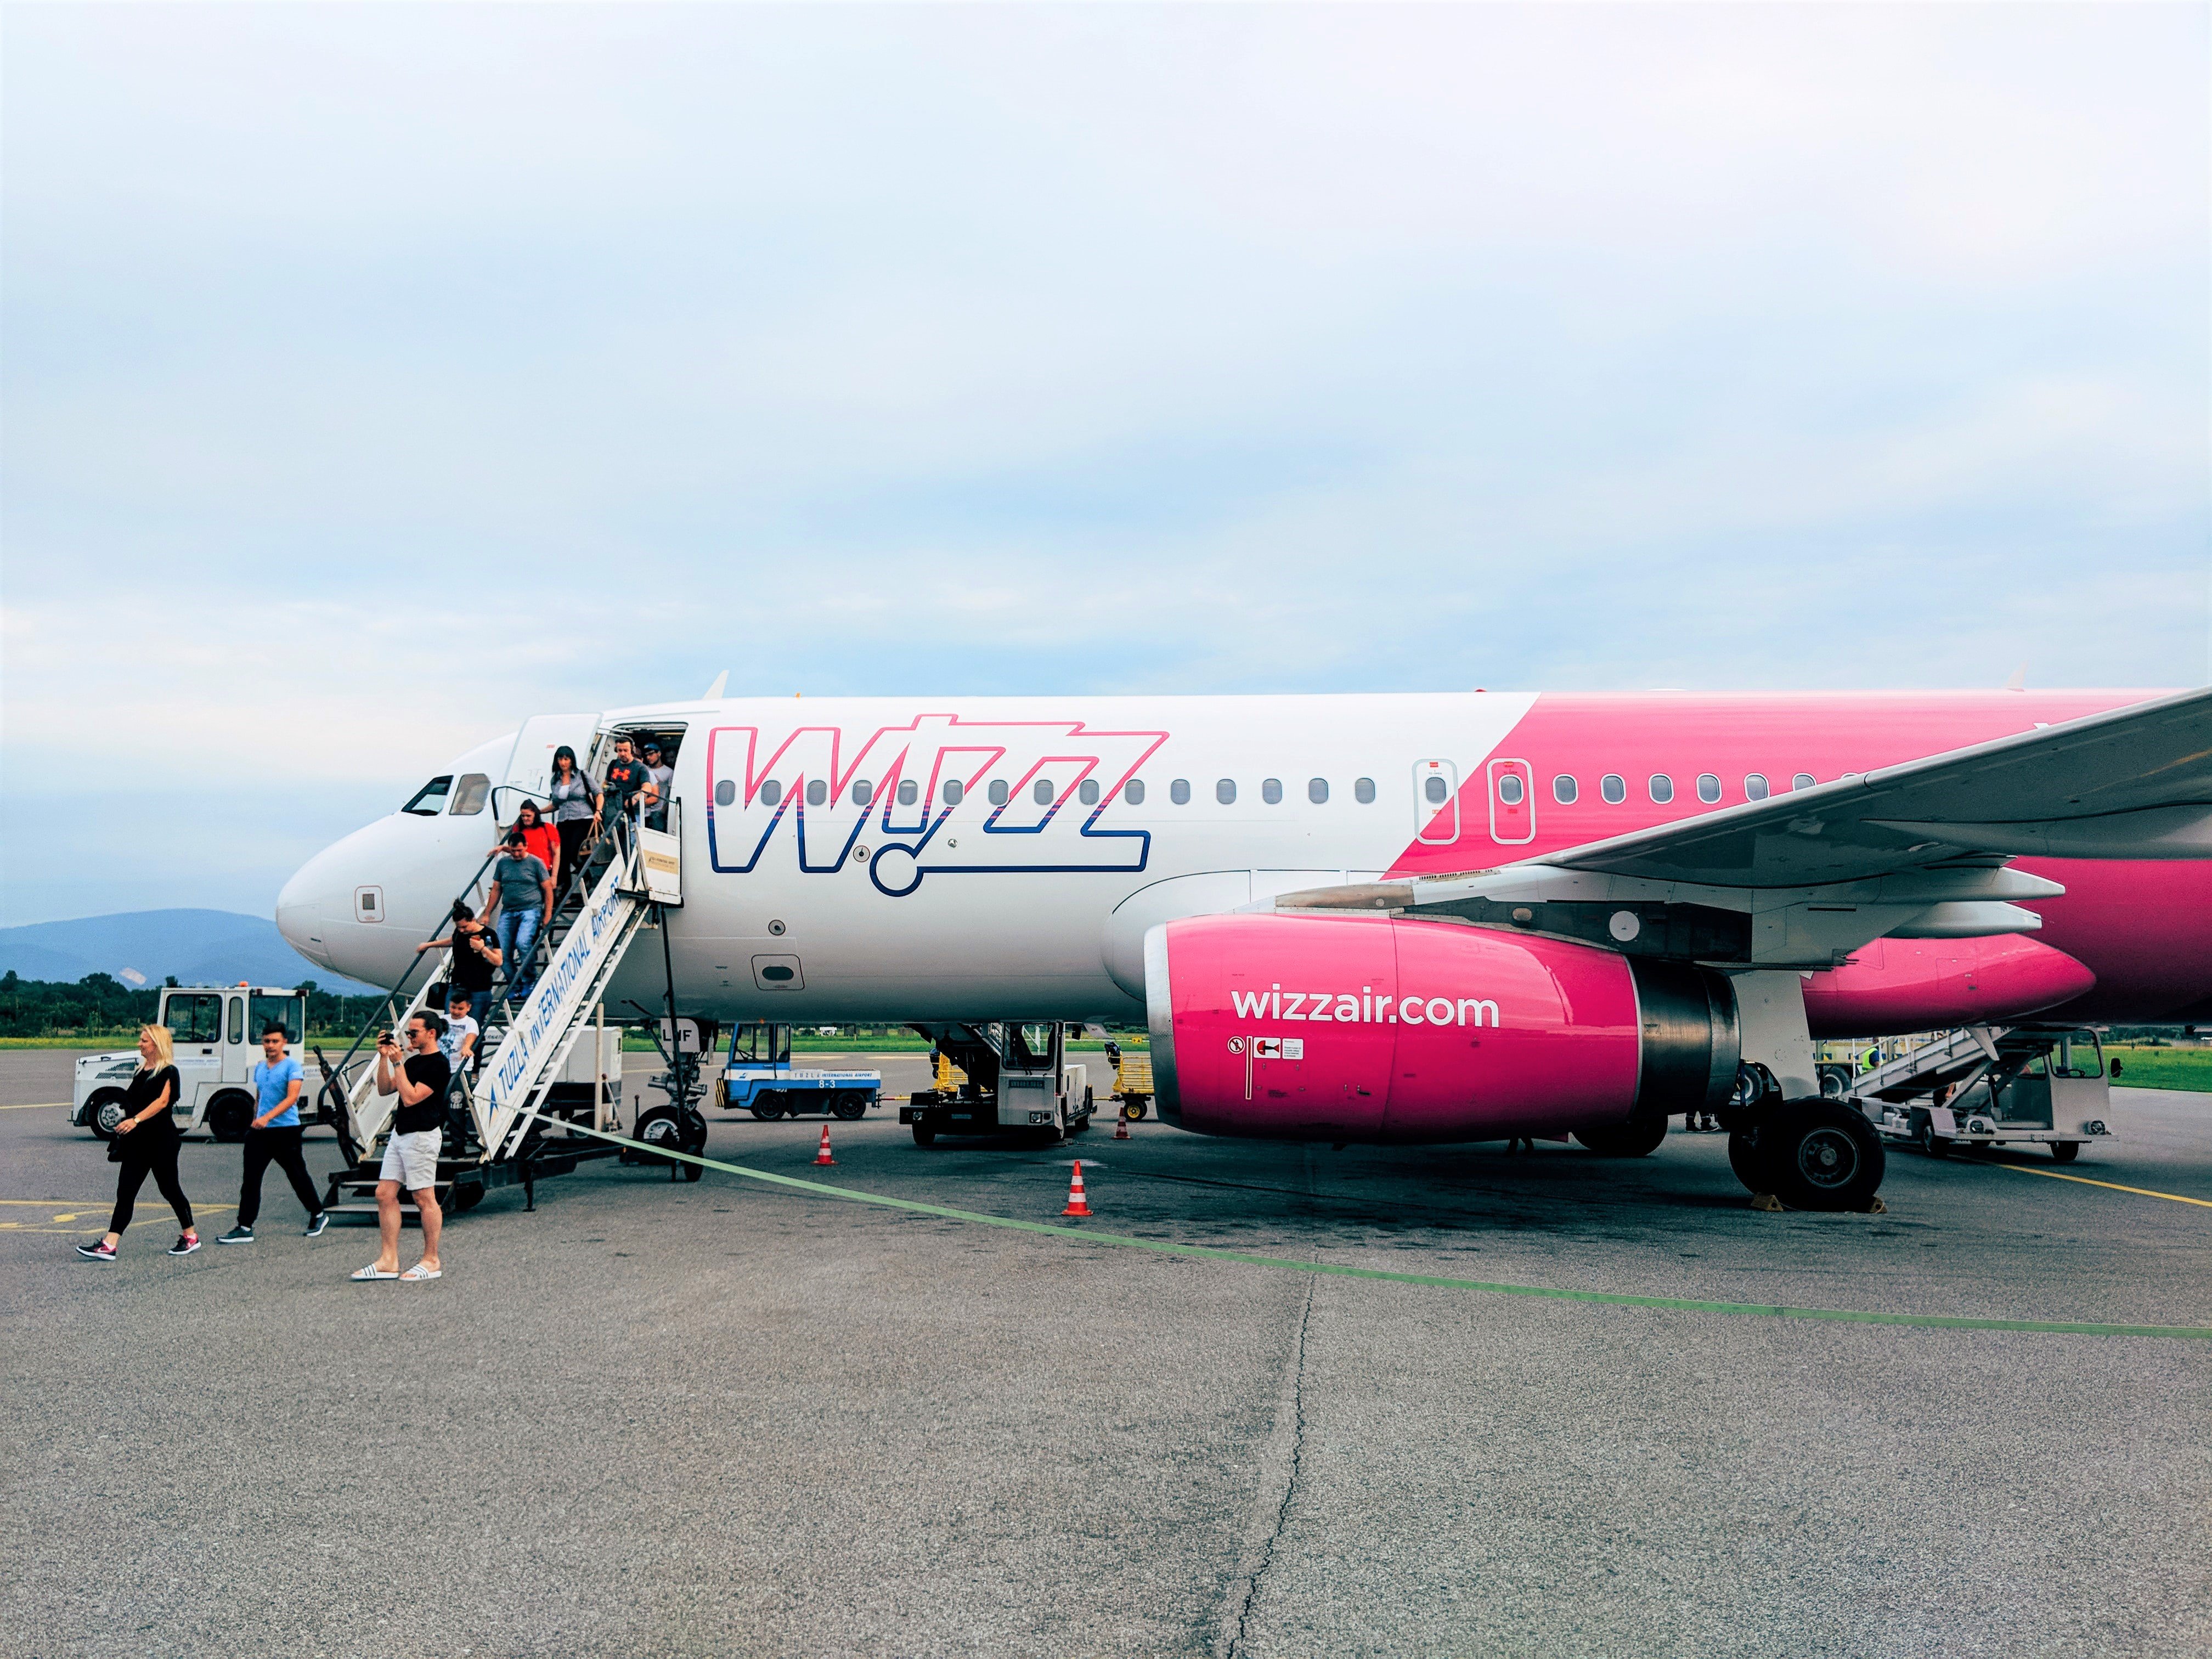 Flight or delay with Wizz Air - Receive up to 600 EUR